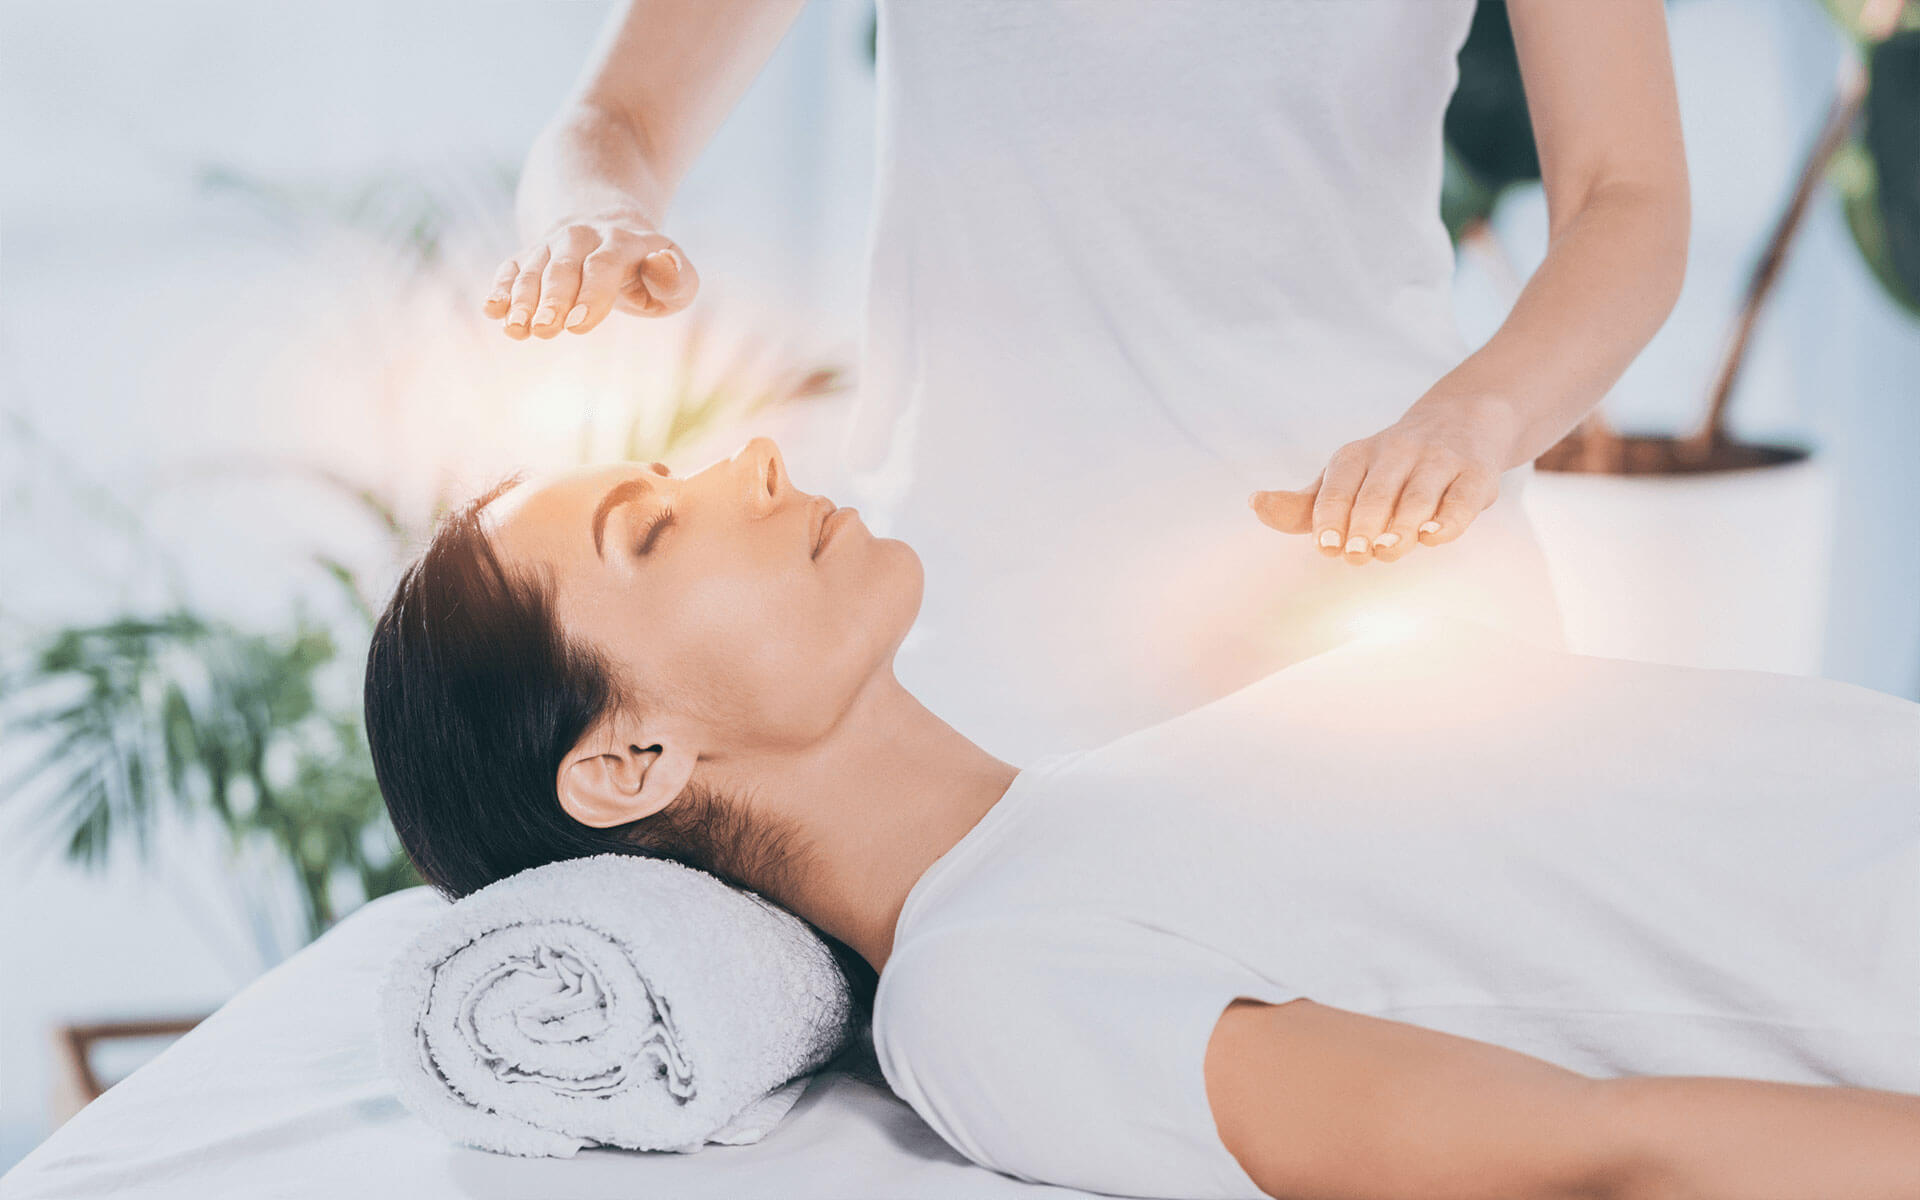 Woman lying on a massage table receiving a reiki treatment